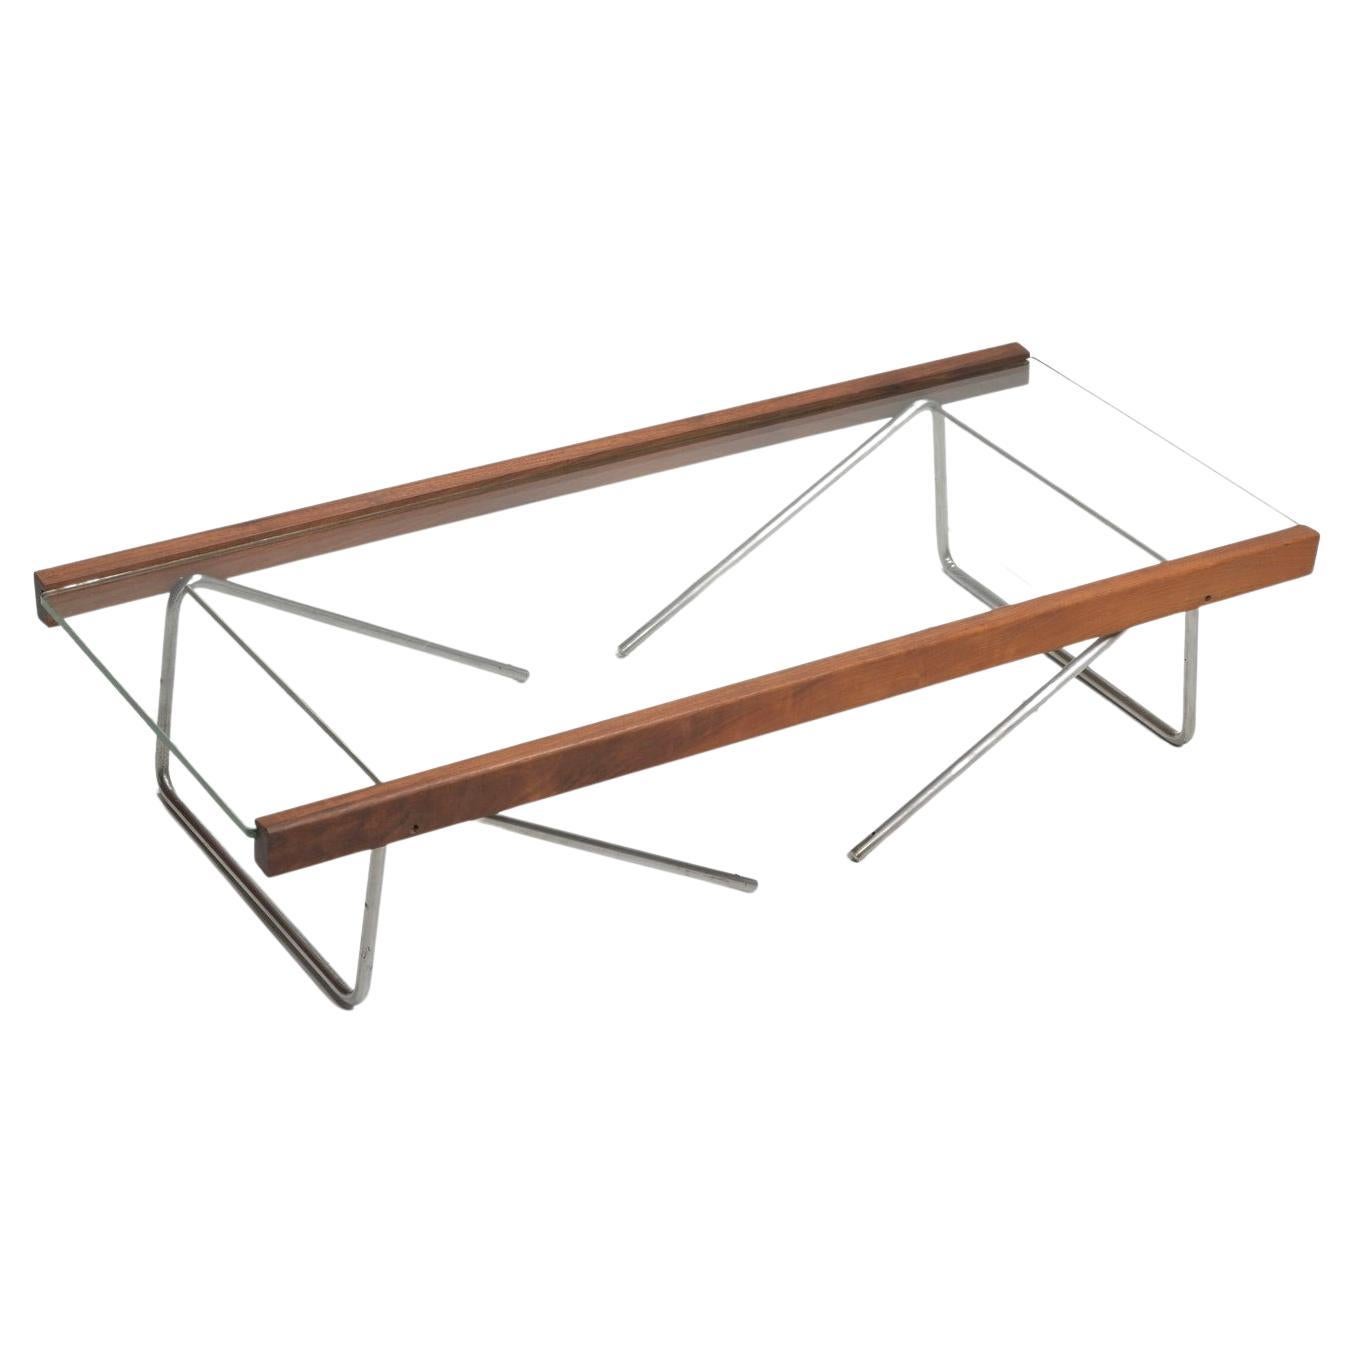 Designed by Honolulu-born Bill Lam. Unique wood accents, stainless steel and glass compliment each other to create this sleek design. Folding legs can be arranged two ways to create a low or medium height coffee table.